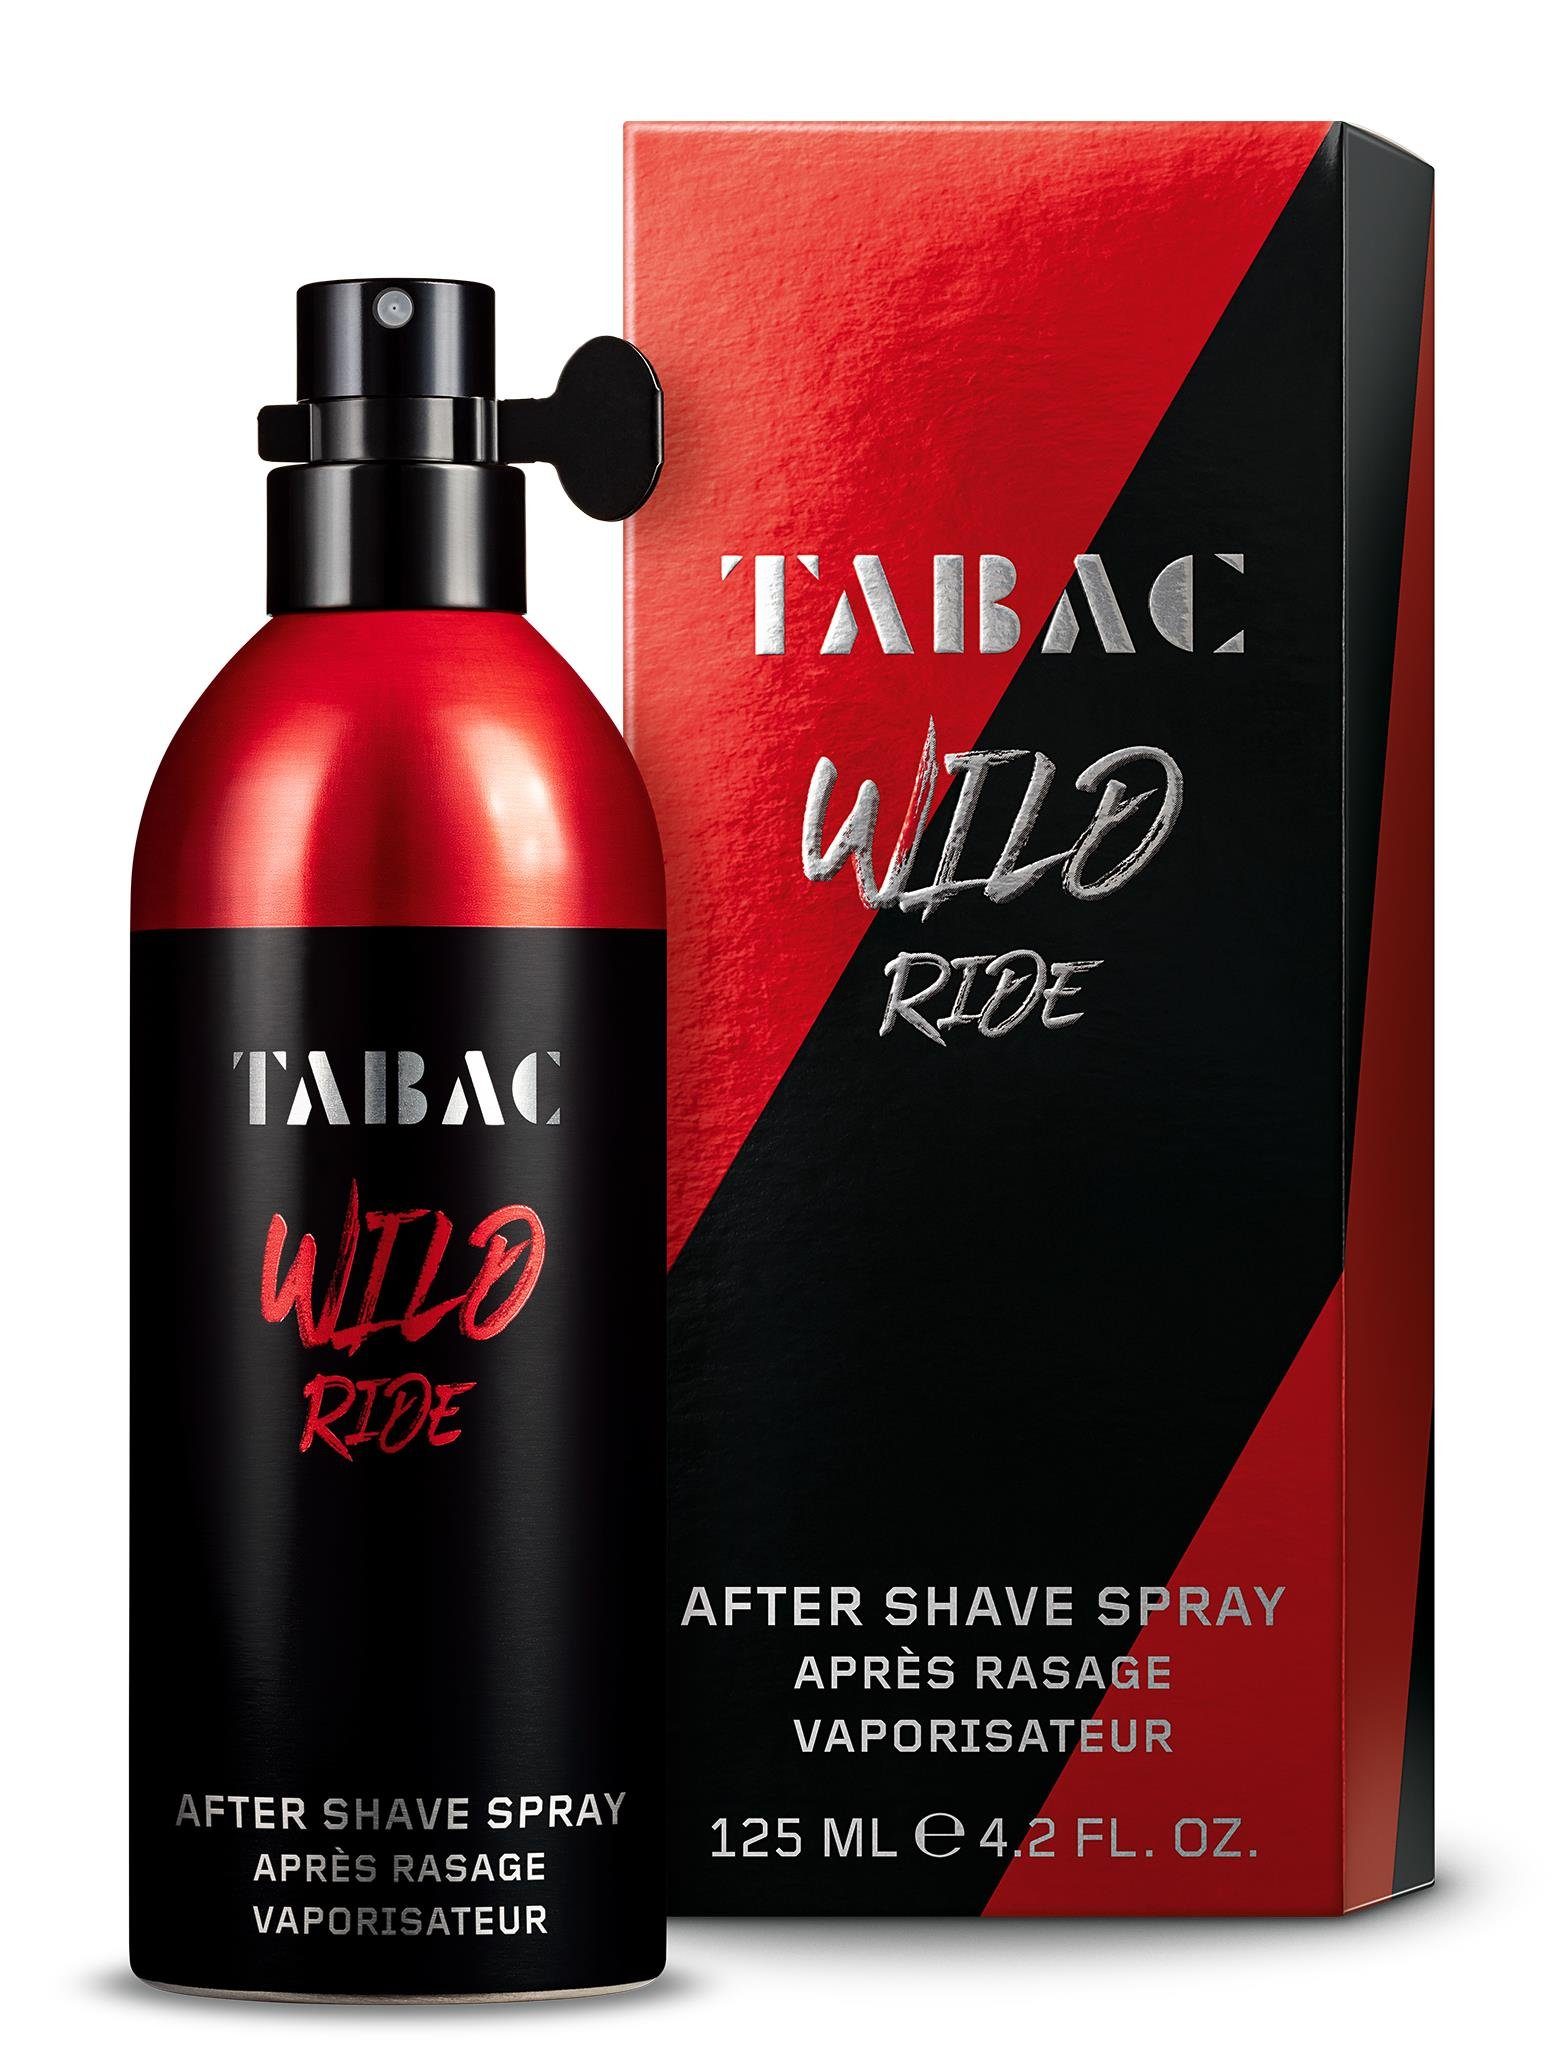 Wild After Ride 125 Shave Wild Lotion Tabac Gesichts-Reinigungslotion Ride ml Tabac